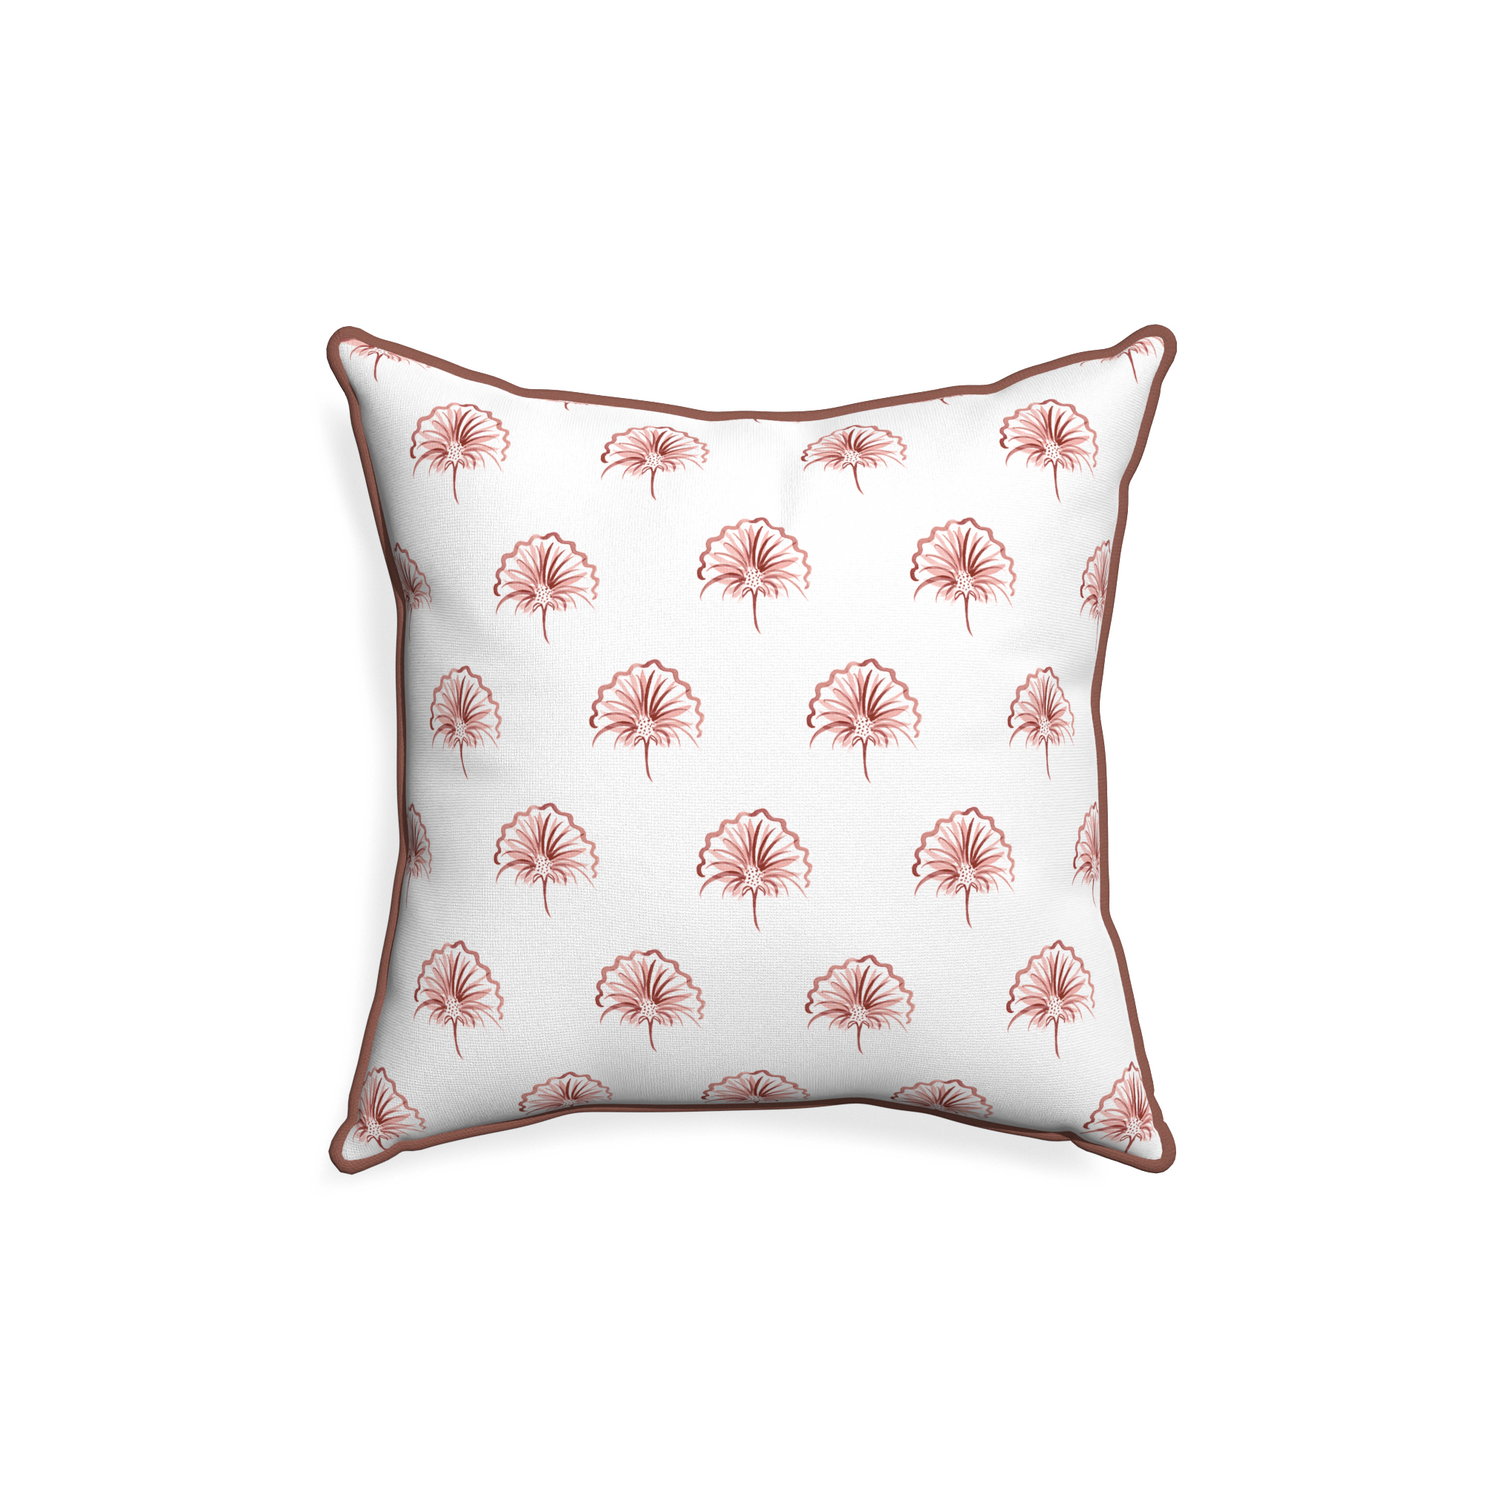 18-square penelope rose custom floral pinkpillow with w piping on white background